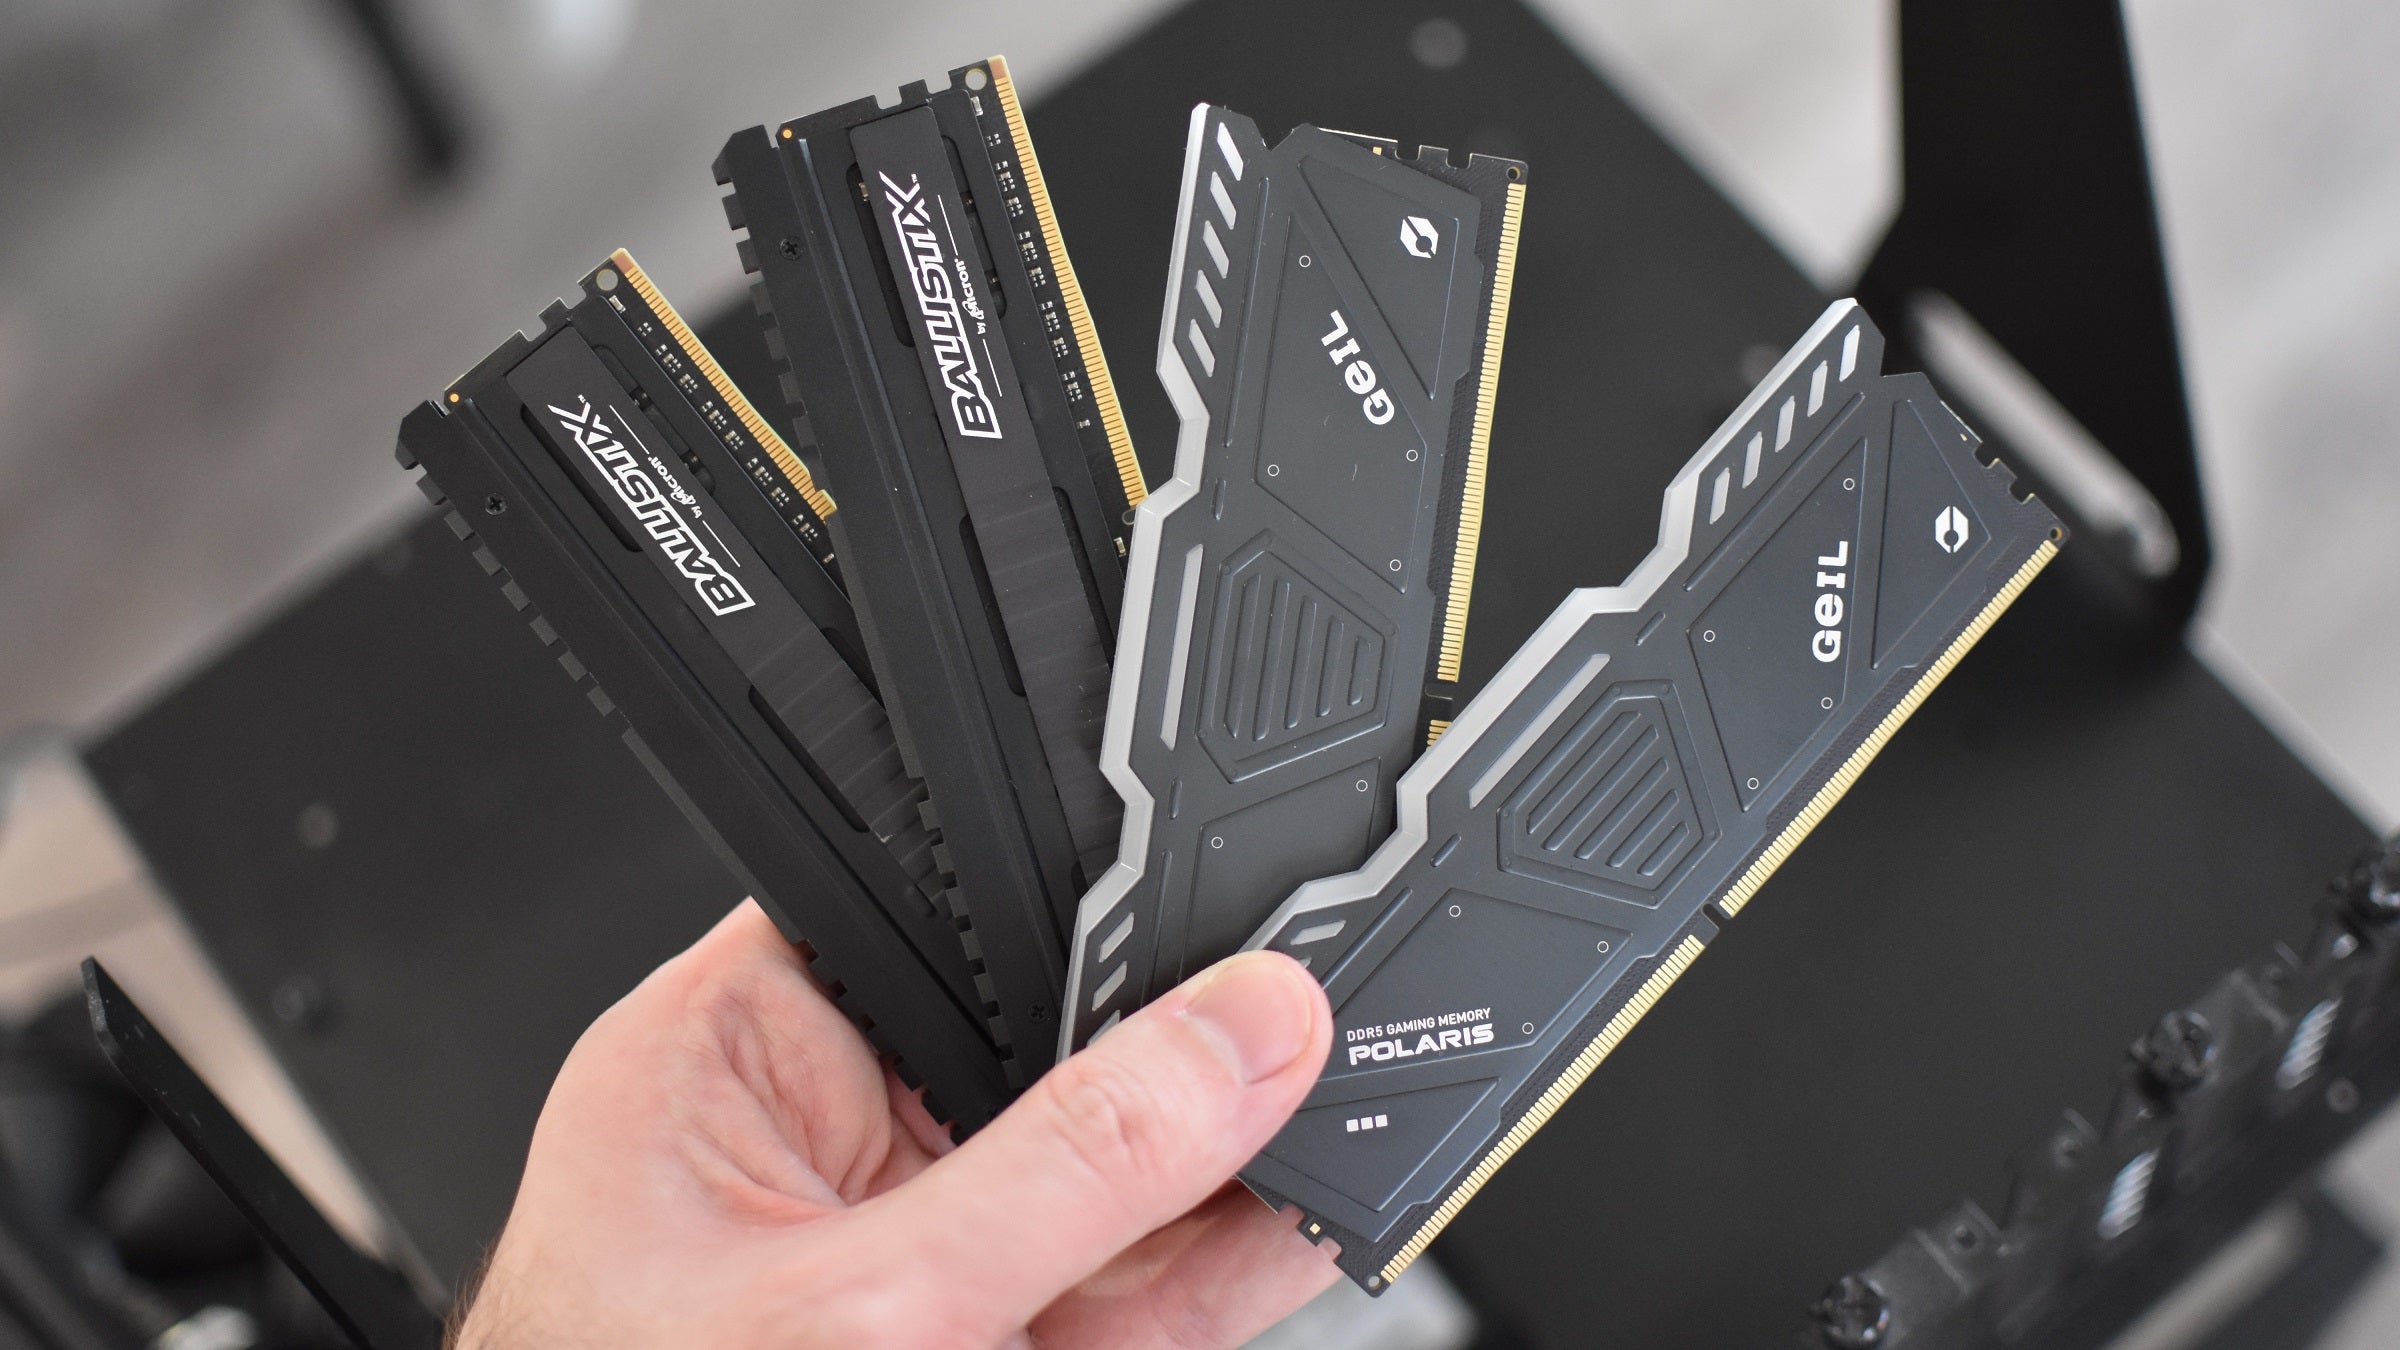 Some DDR4 and DDR5 RAM modules, fanned out and held in one hand.